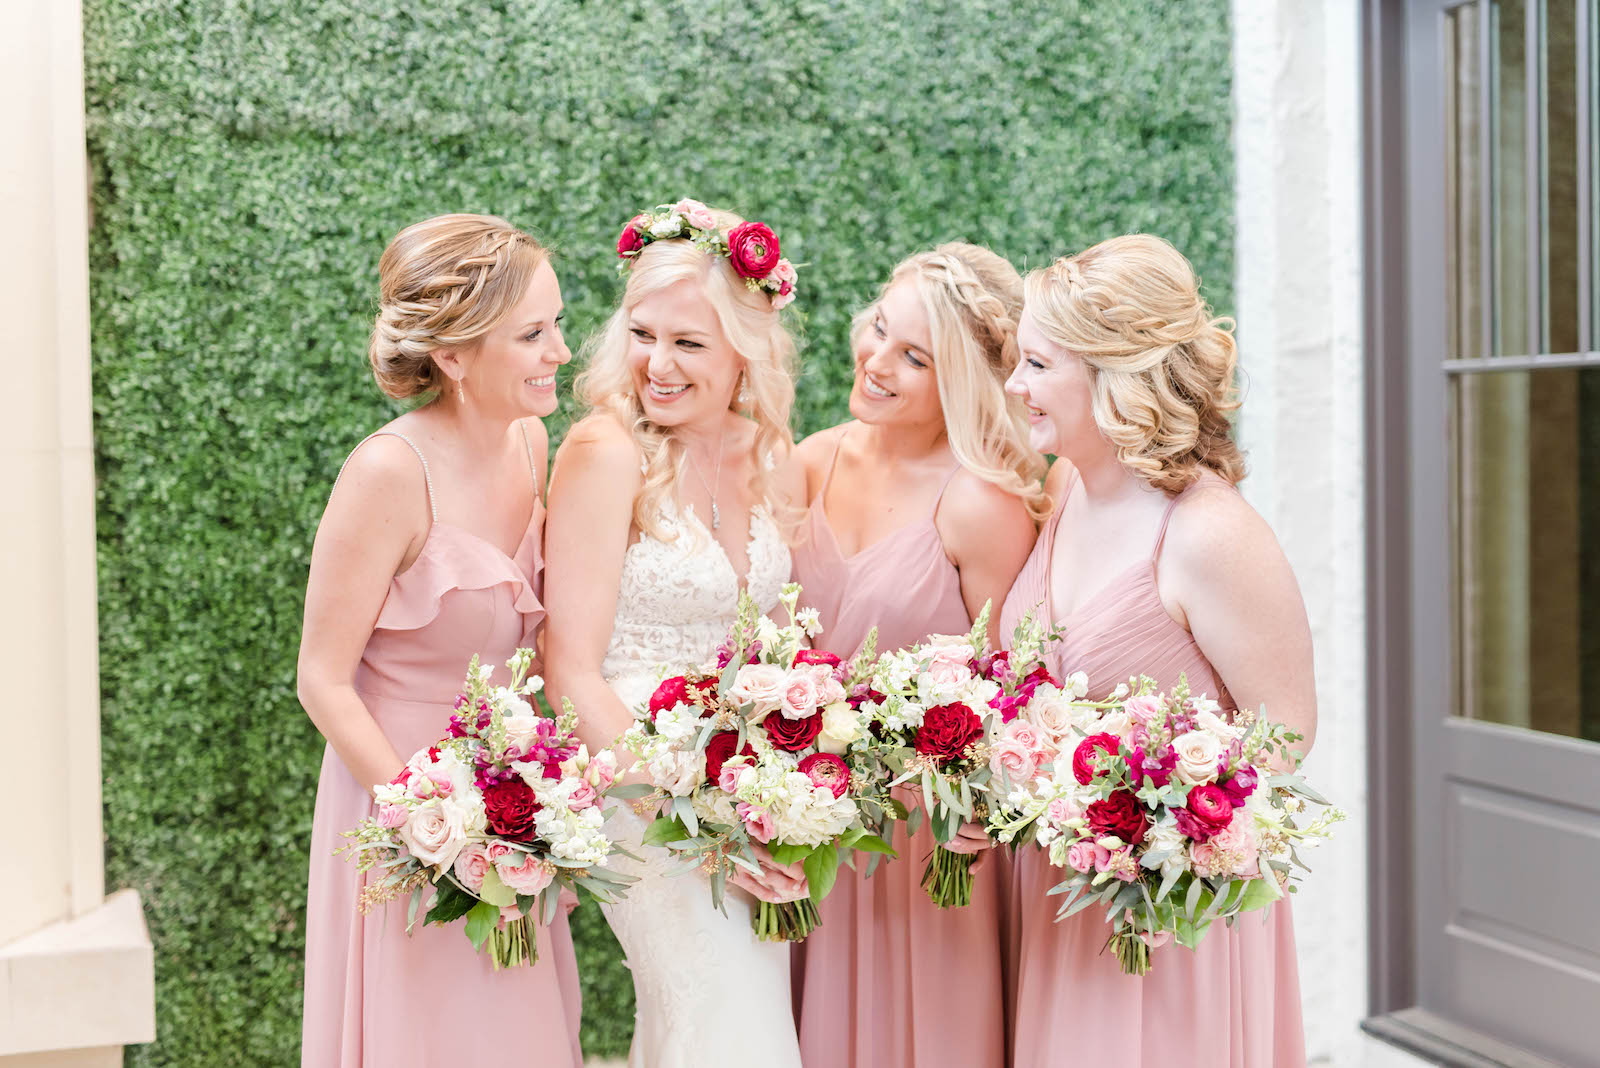 Bride and Bridesmaids Portraits | Blush Pink Dusty Rose Mismatched Chiffon Bridesmaid Dresses | Stella York Lace Sheath Spaghetti Strap Empire Waist Wedding Dress Bridal Gown | Bride Wedding Bouquet and Halo Crown with Blush Pink Dusty and Burgundy Rose Garden Roses, Snapdragons, Stock, and Eucalyptus Greenery